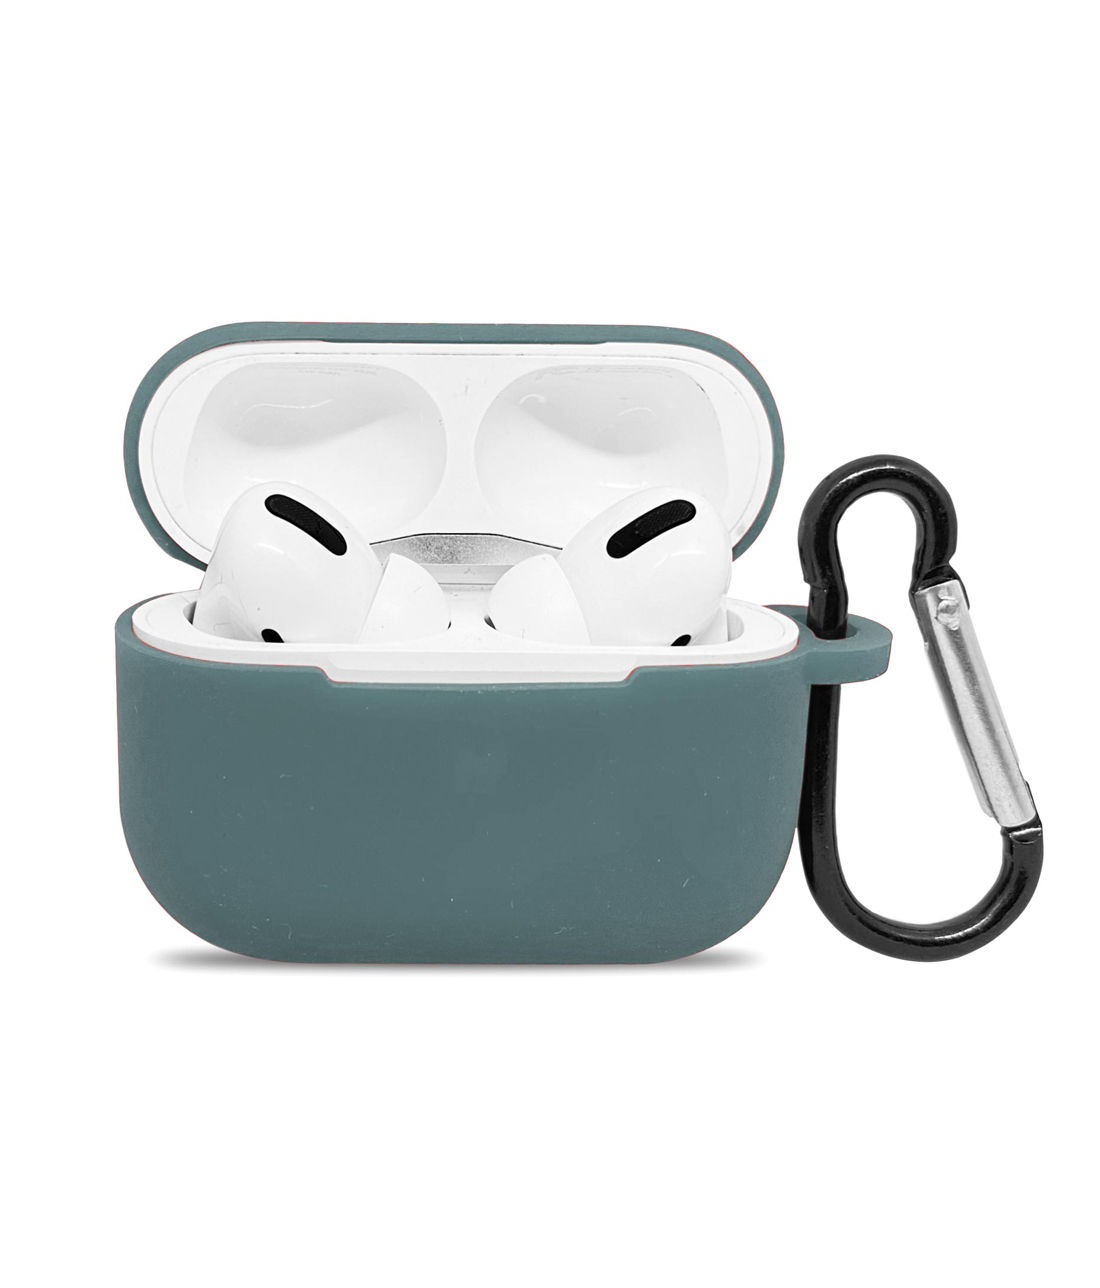 Buy Silicone Case Seal Grey - Airpod Pro Case Airpod Cases Online